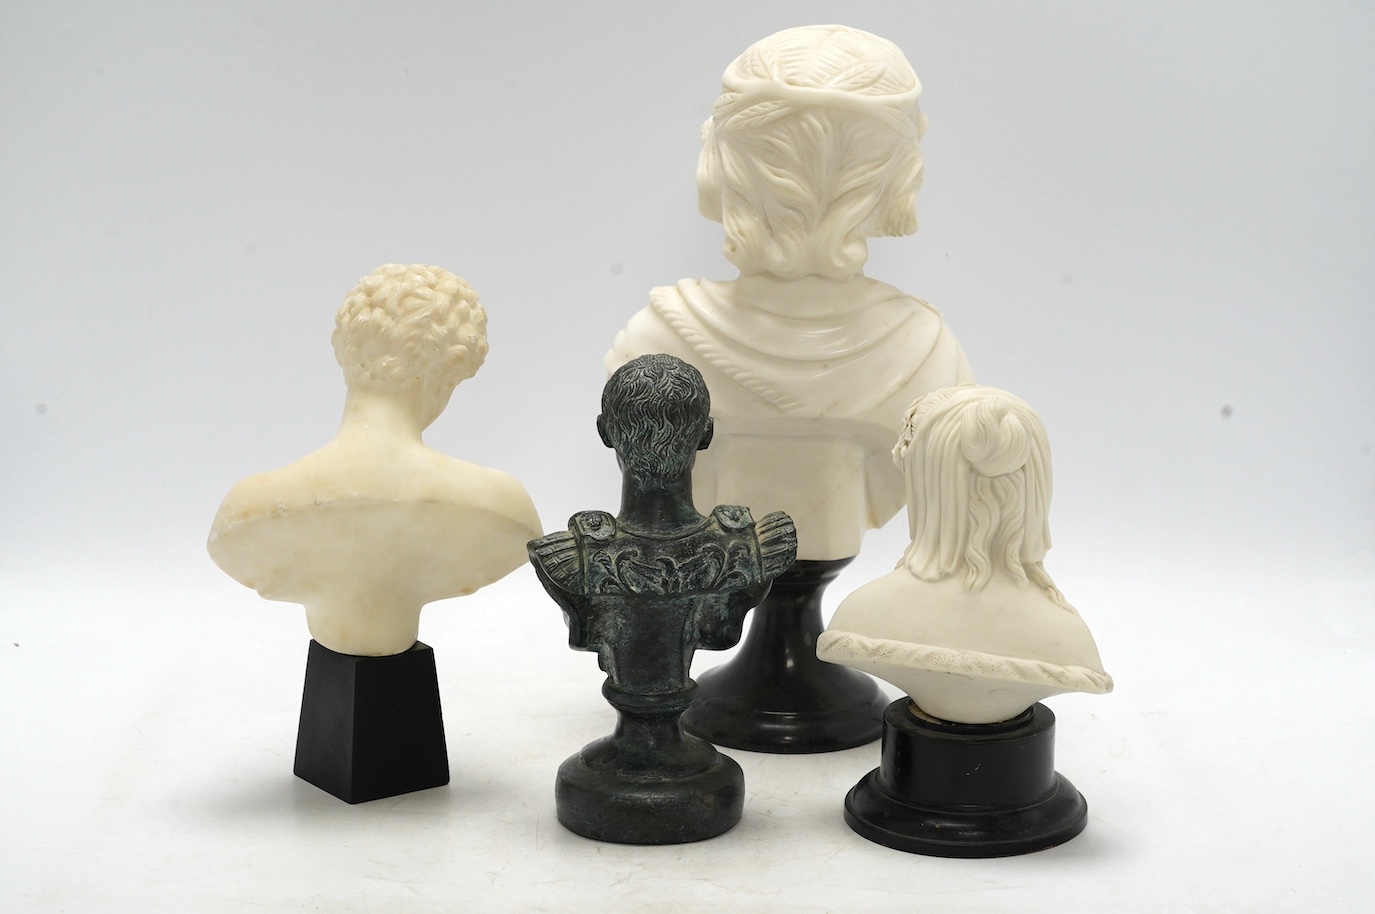 An alabaster bust of Anthony, a larger marble bust, a Parian bust on stand of a girl and a bronze bust of Julius Caesar, tallest 31cm high (4). Condition - Parian ware bust fair, other three good